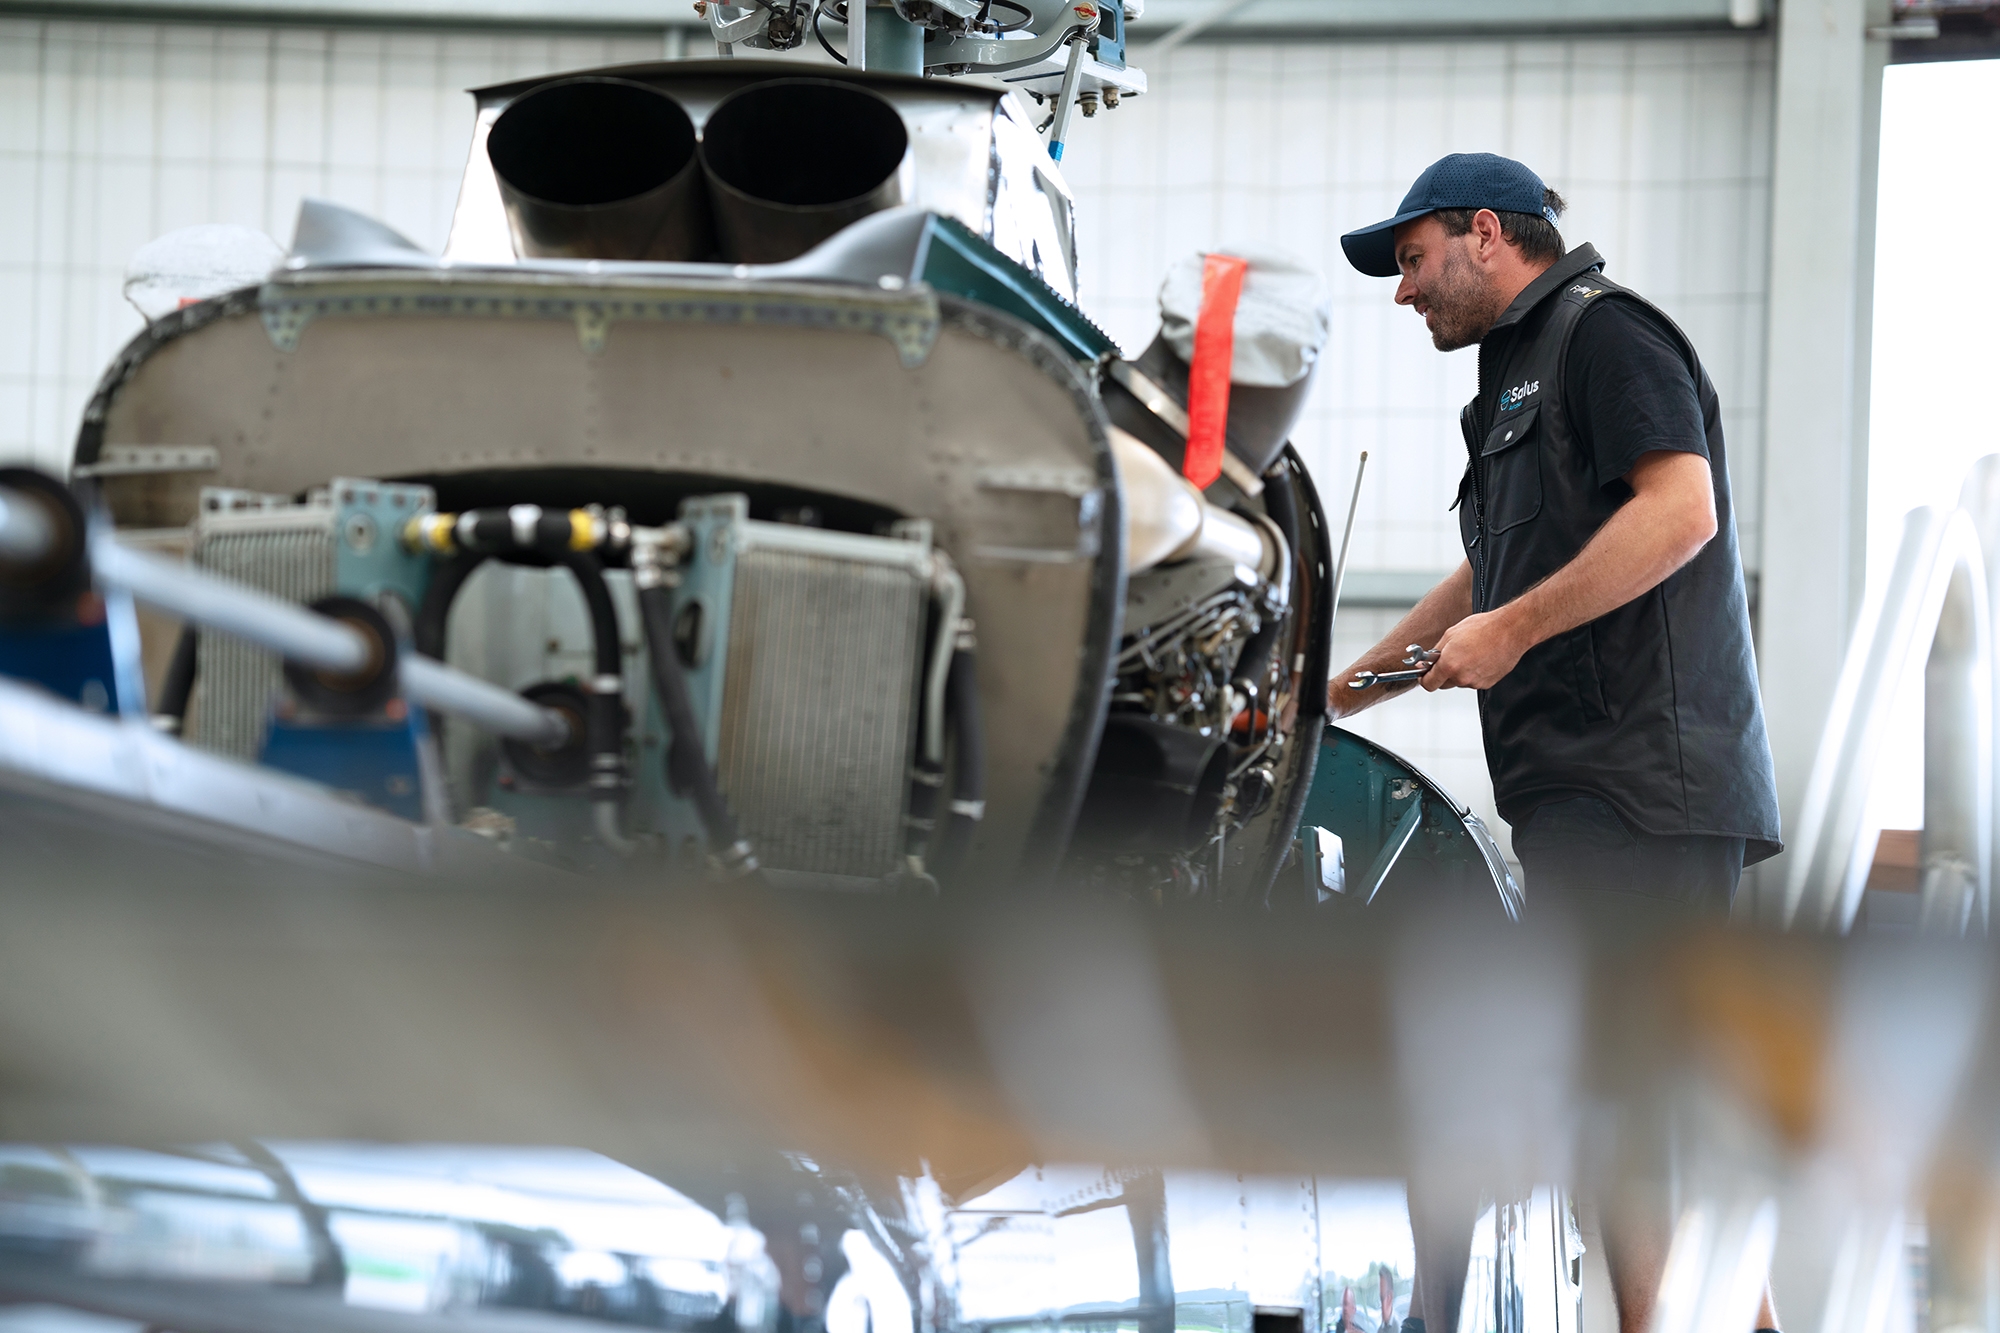 Helicopter engineer working on aircraft in hangar